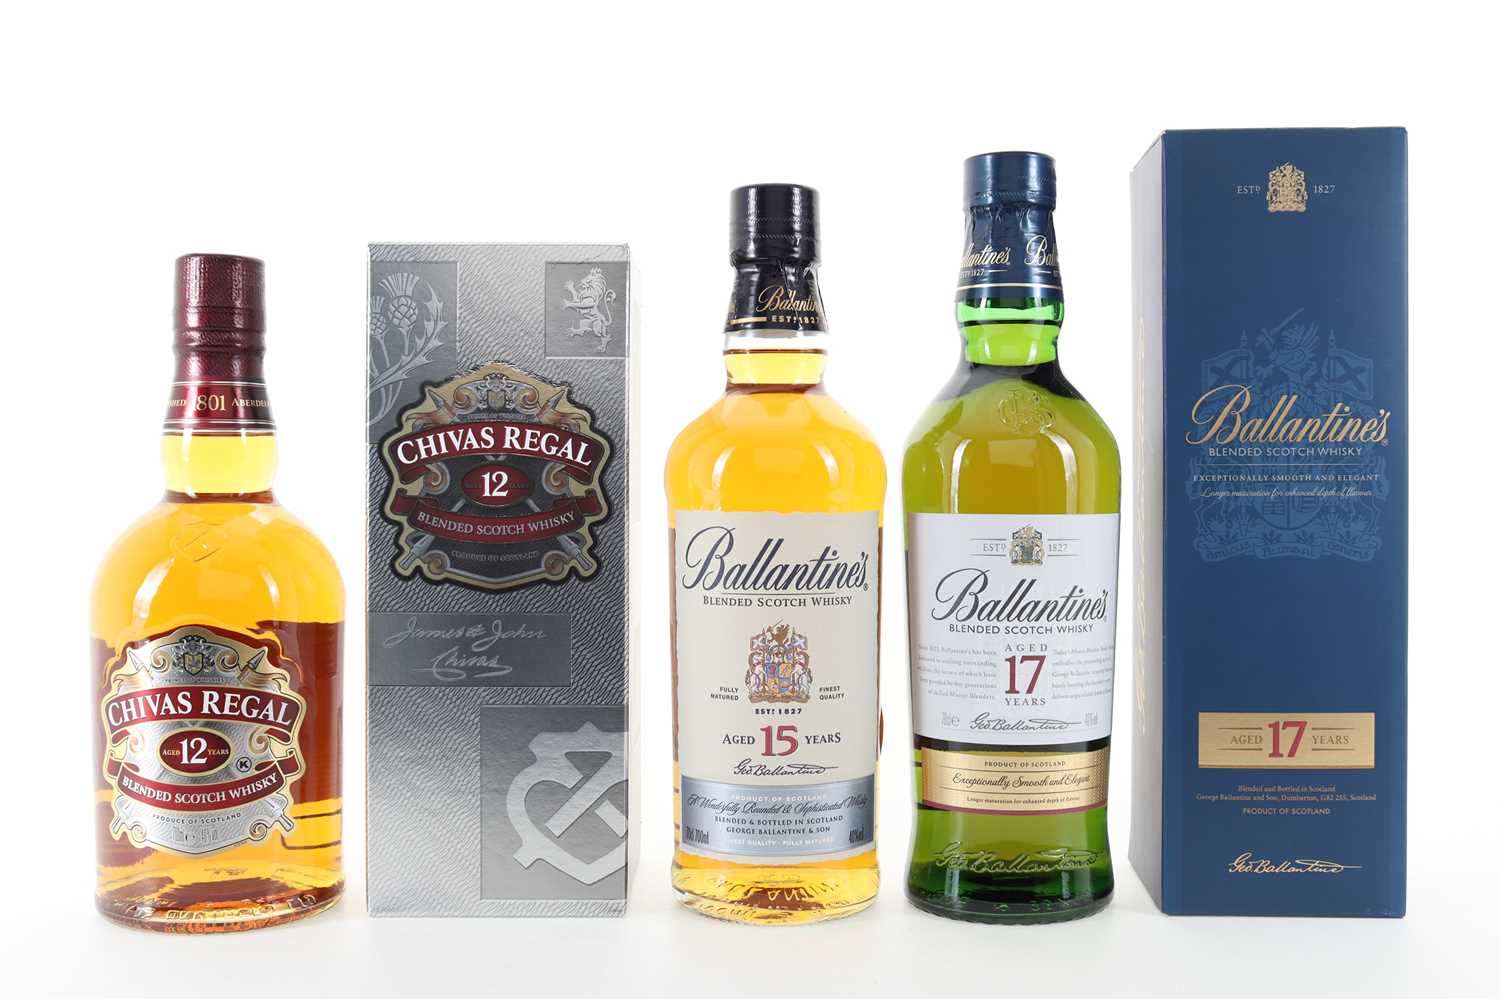 BALLANTINE'S 15 YEAR OLD, 17 YEAR OLD AND CHIVAS REGAL 12 YEAR OLD BLENDED WHISKY